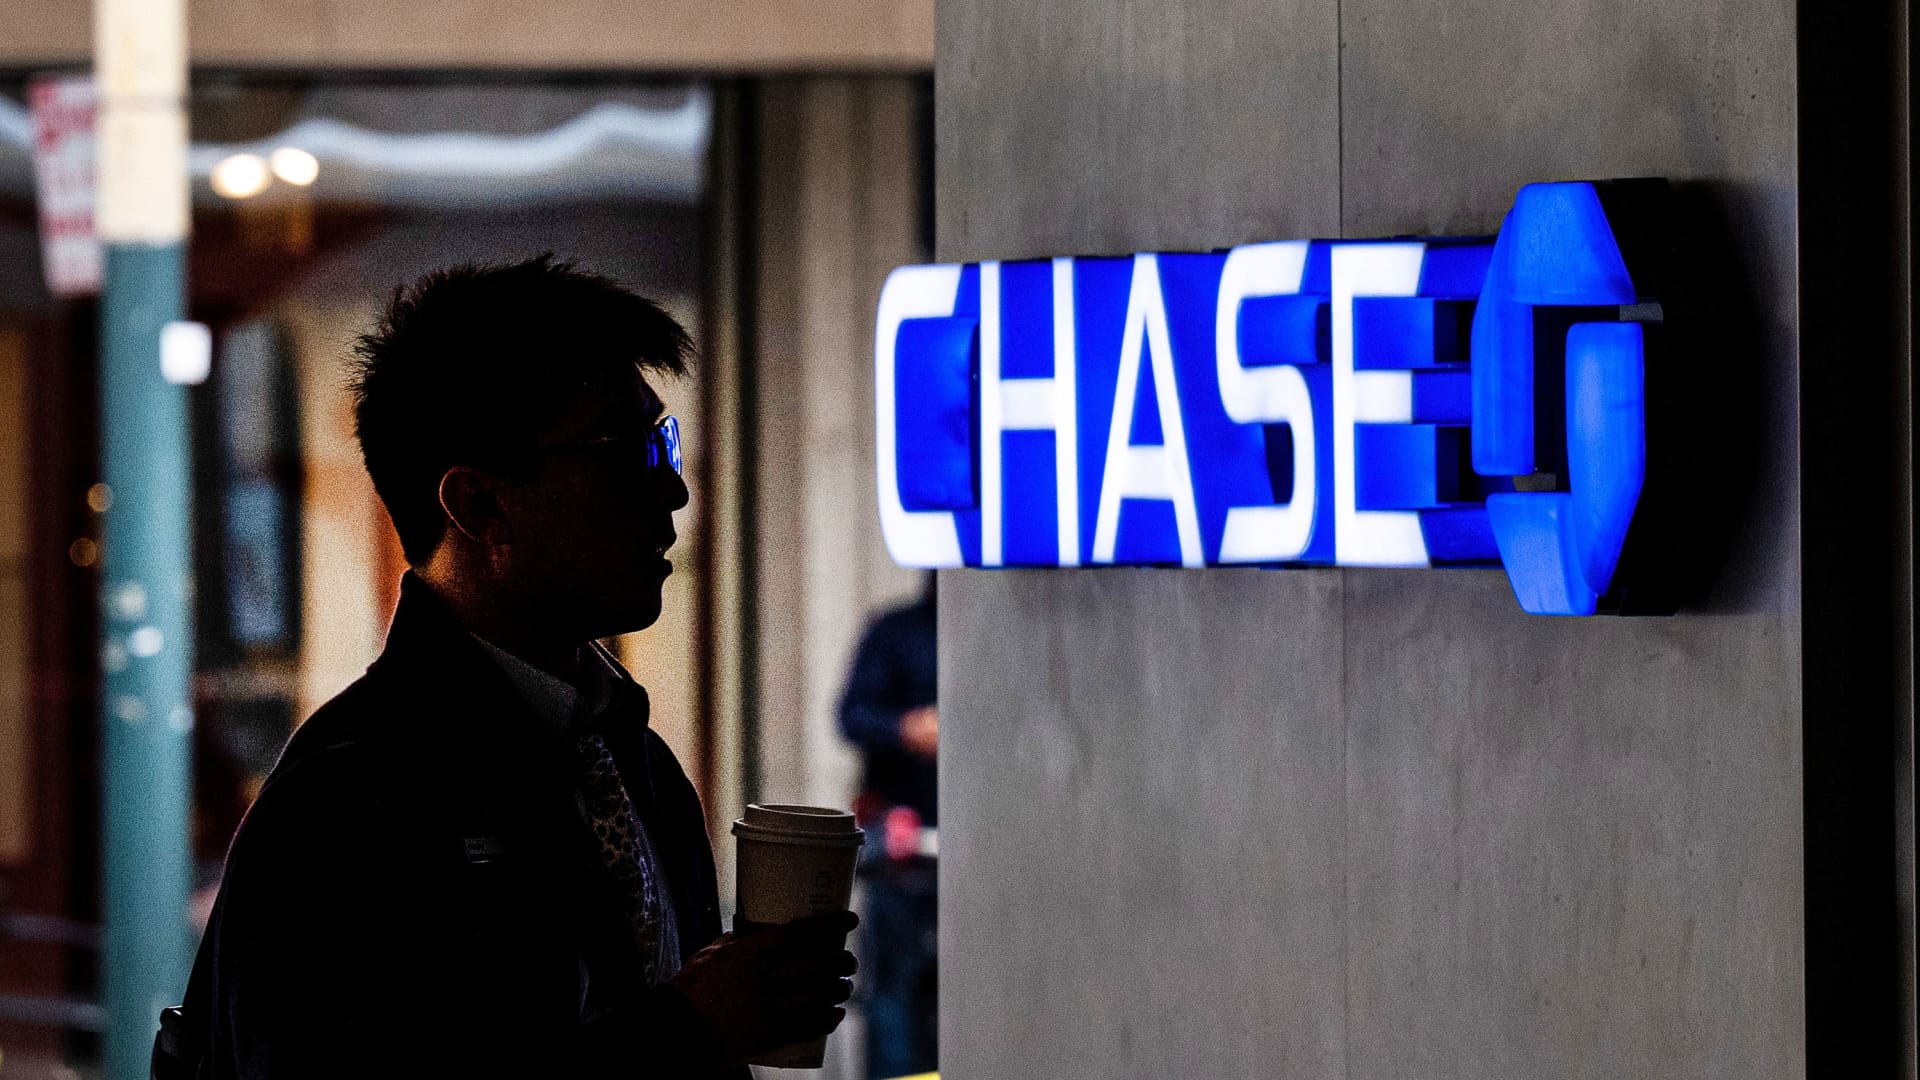 JPMorgan Chase, taking a feature from fintech rivals, gives some customers early payday deposits